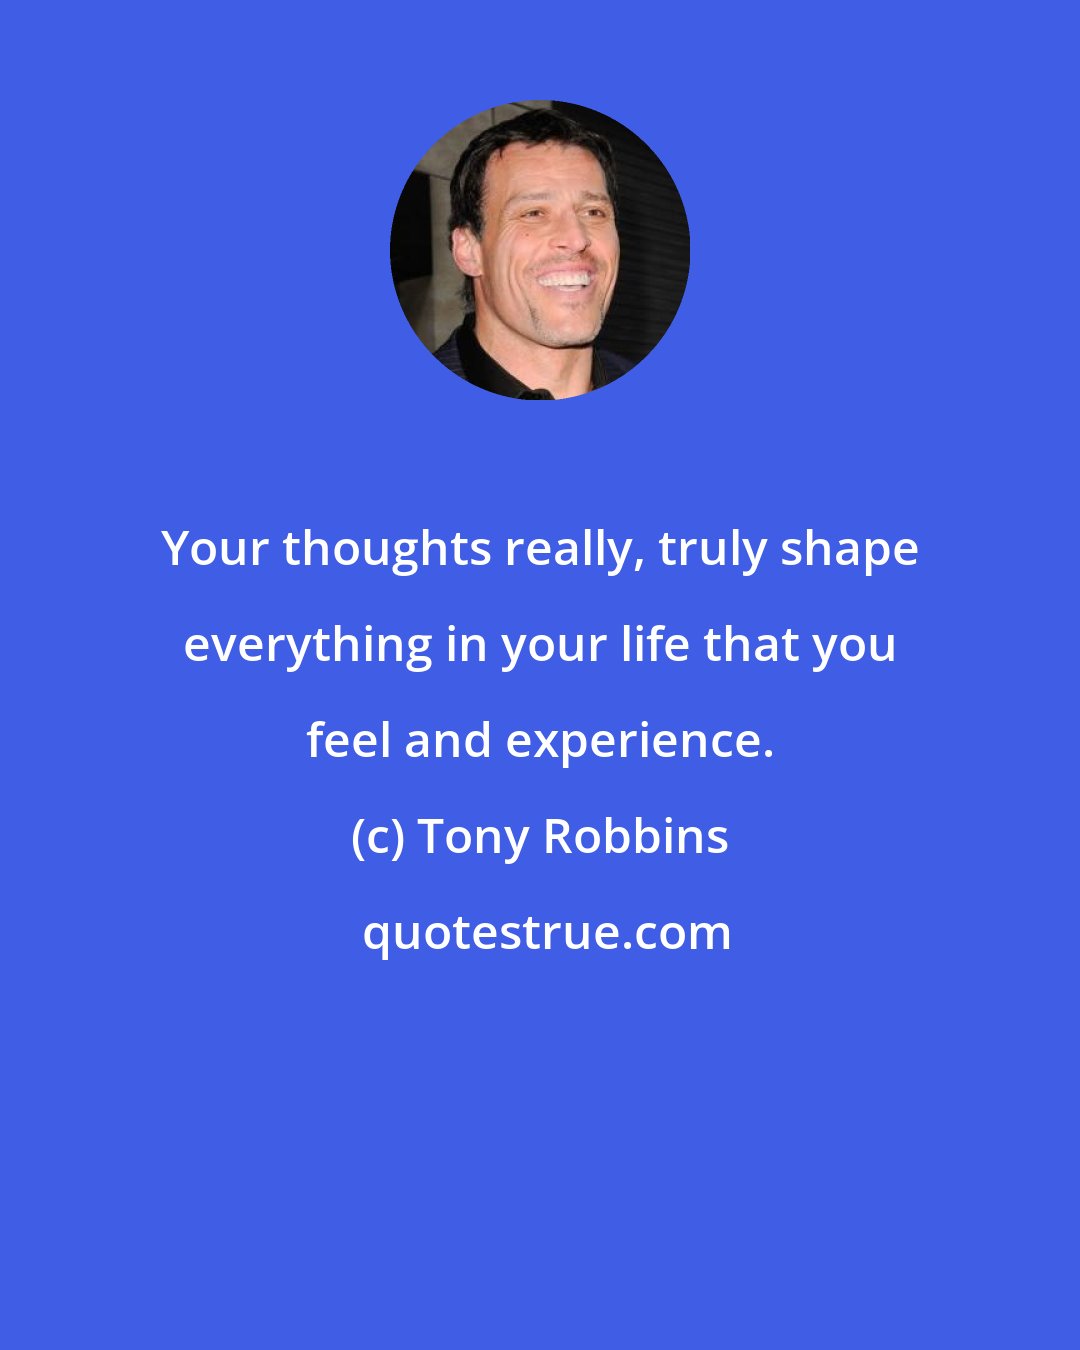 Tony Robbins: Your thoughts really, truly shape everything in your life that you feel and experience.